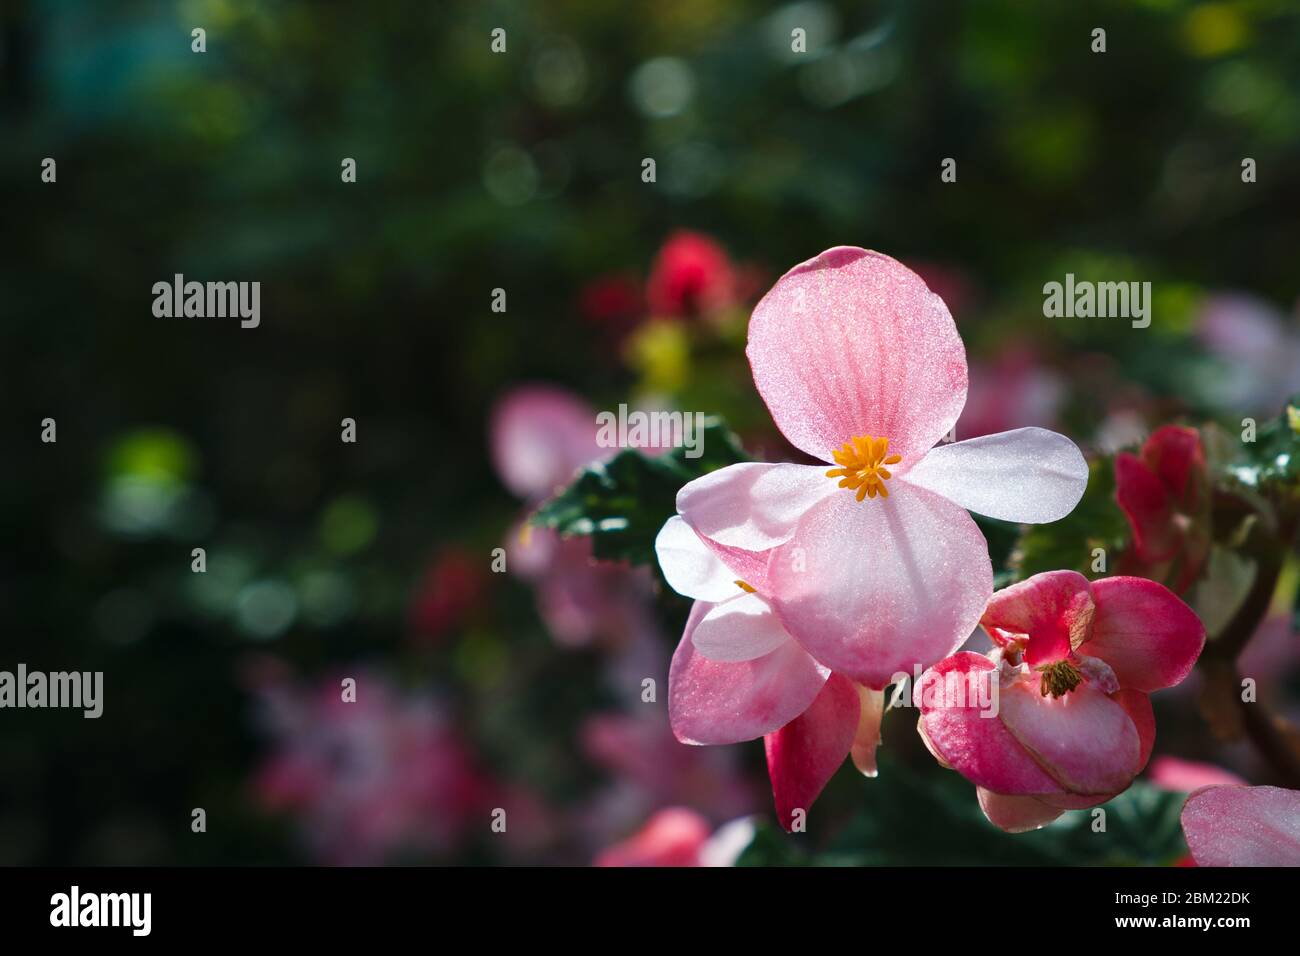 Begonia flowers in the foreground on a background of green garden. Begonia cucullata Willd. Stock Photo